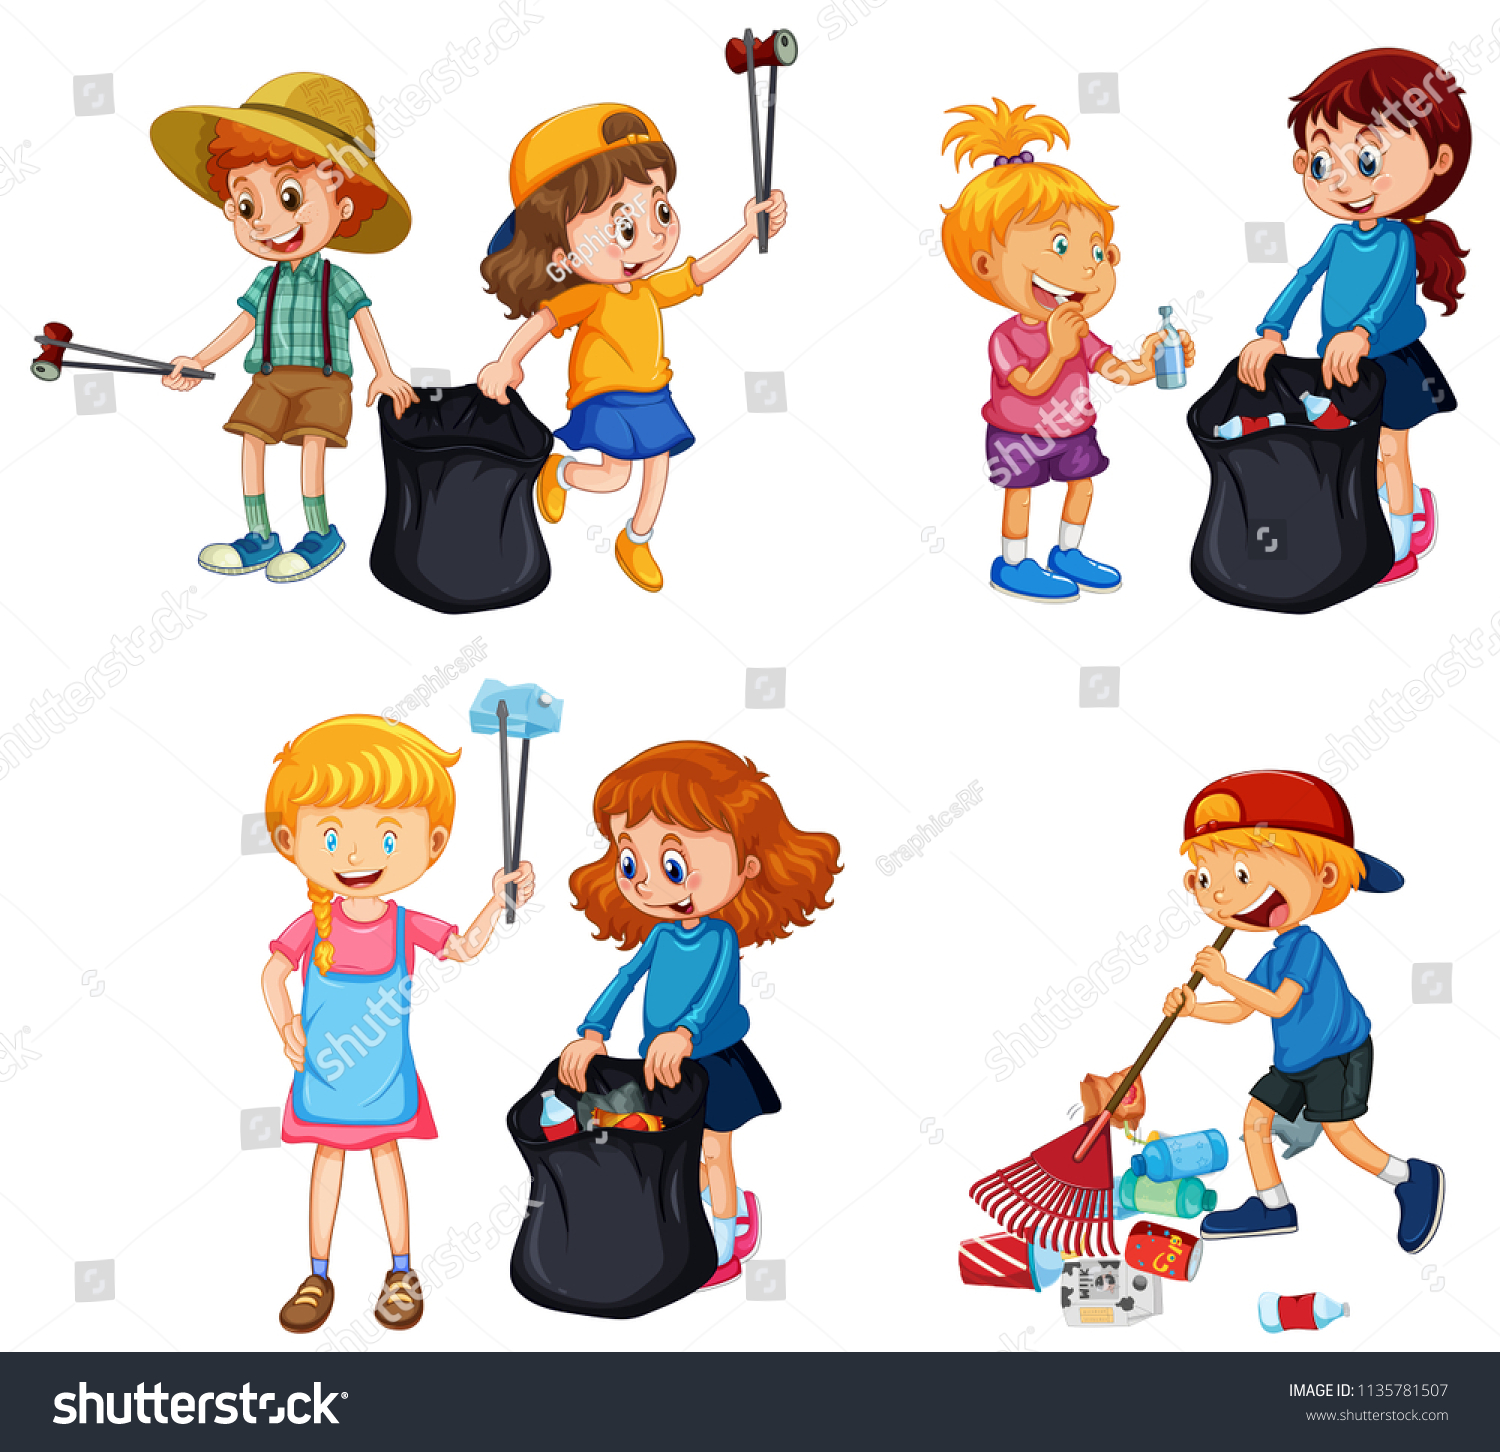 Kids cleaning clipart Images, Stock Photos & Vectors | Shutterstock